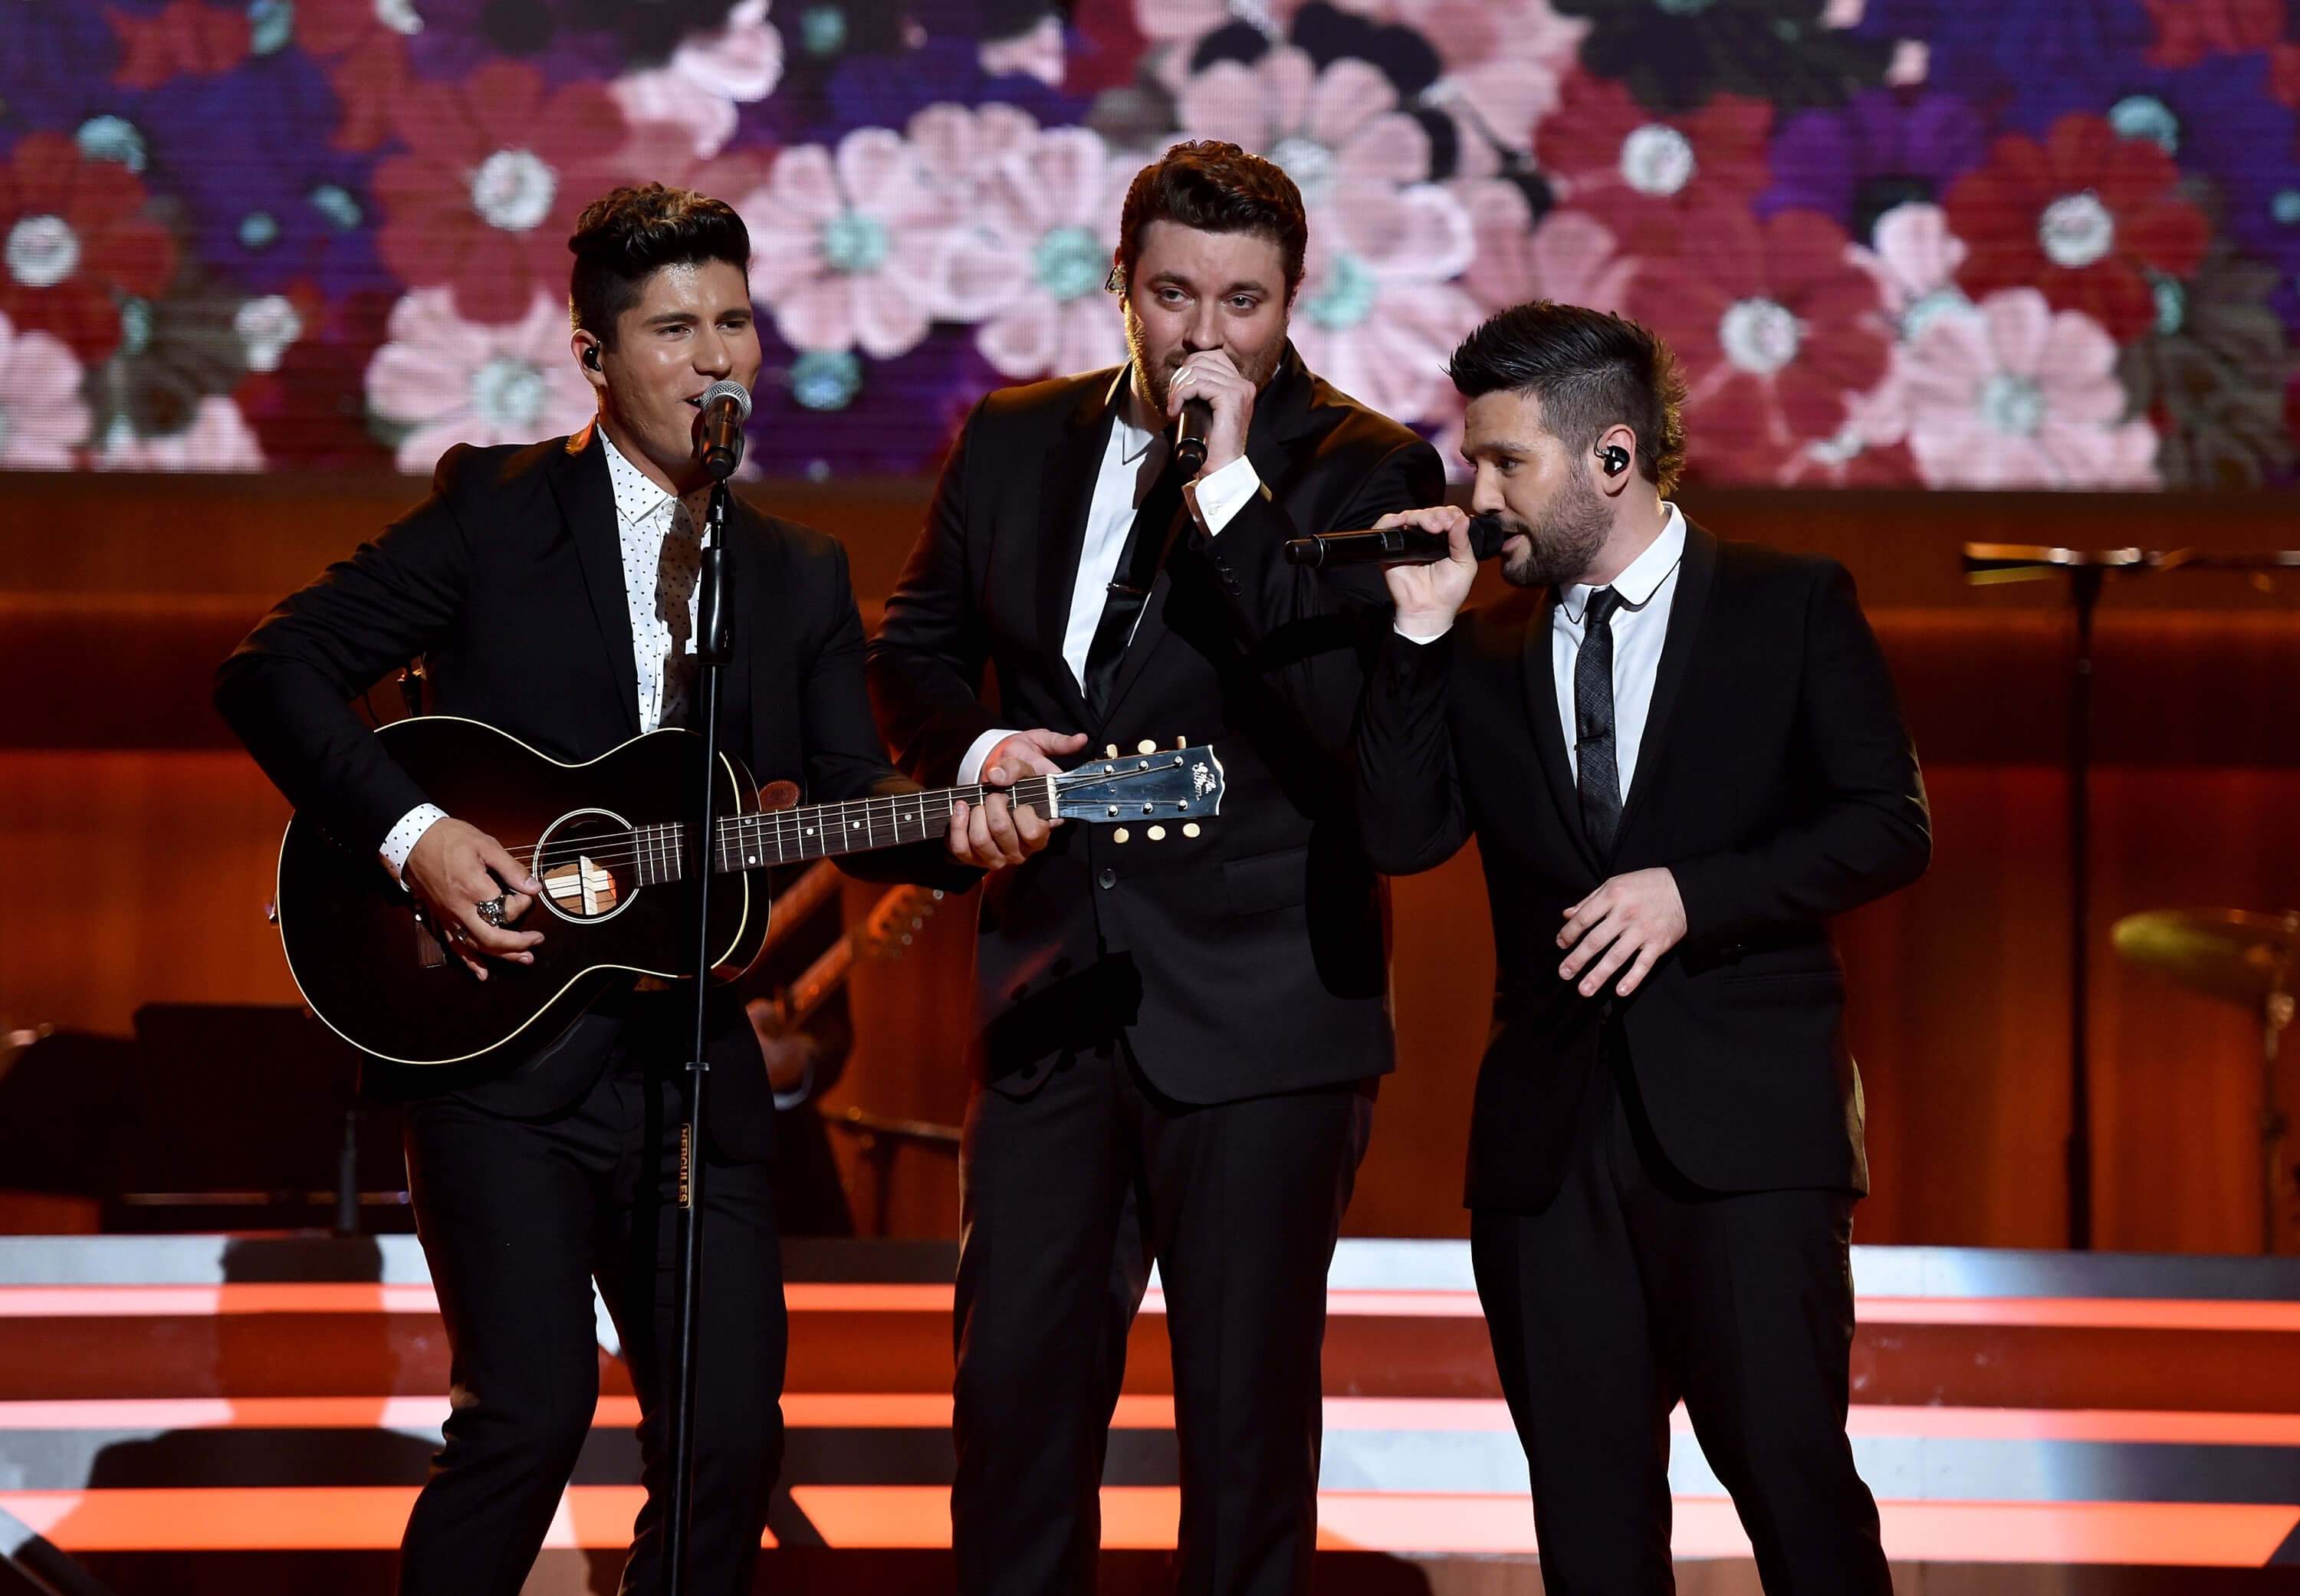 NASHVILLE, TN - AUGUST 30: Musical artists Dan Smyers from musical group Dan + Shay, Chris Young and Shay Mooney from musicial group Dan+ Shay perform onstage during the 10th Annual ACM Honors at the Ryman Auditorium on August 30, 2016 in Nashville, Tennessee. (Photo by John Shearer/Getty Images for ACM)